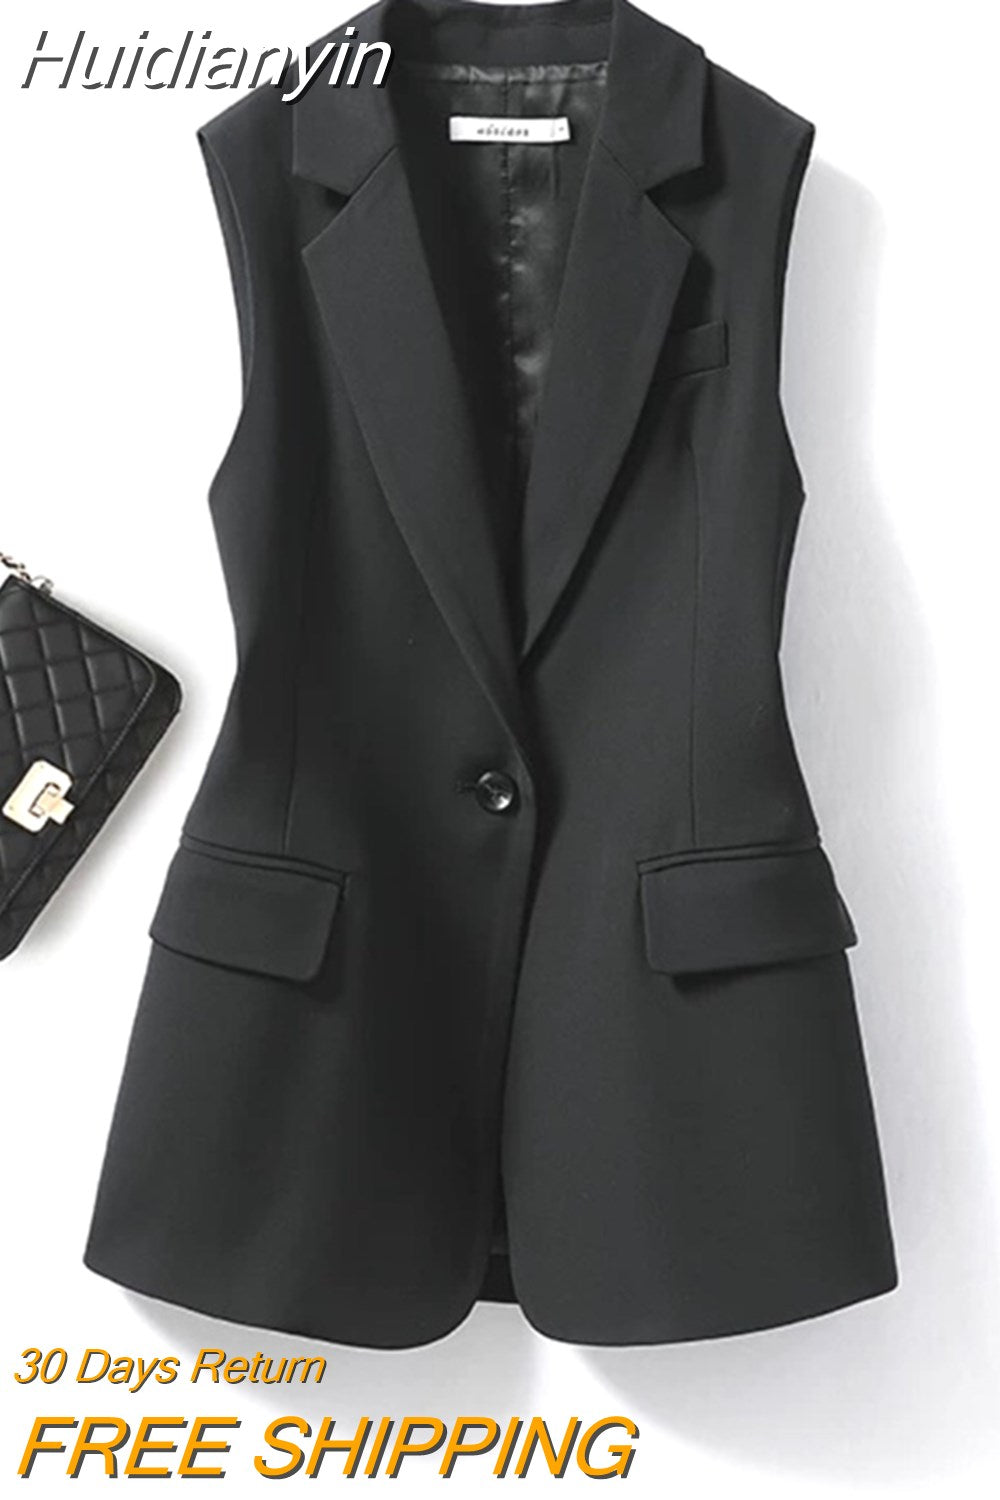 Huidianyin Women's Lapel Collar Vest Coat  All-Matched Single Breasted Sleeveless Classic Solid Color Chic Vintage Office Lady Jacket